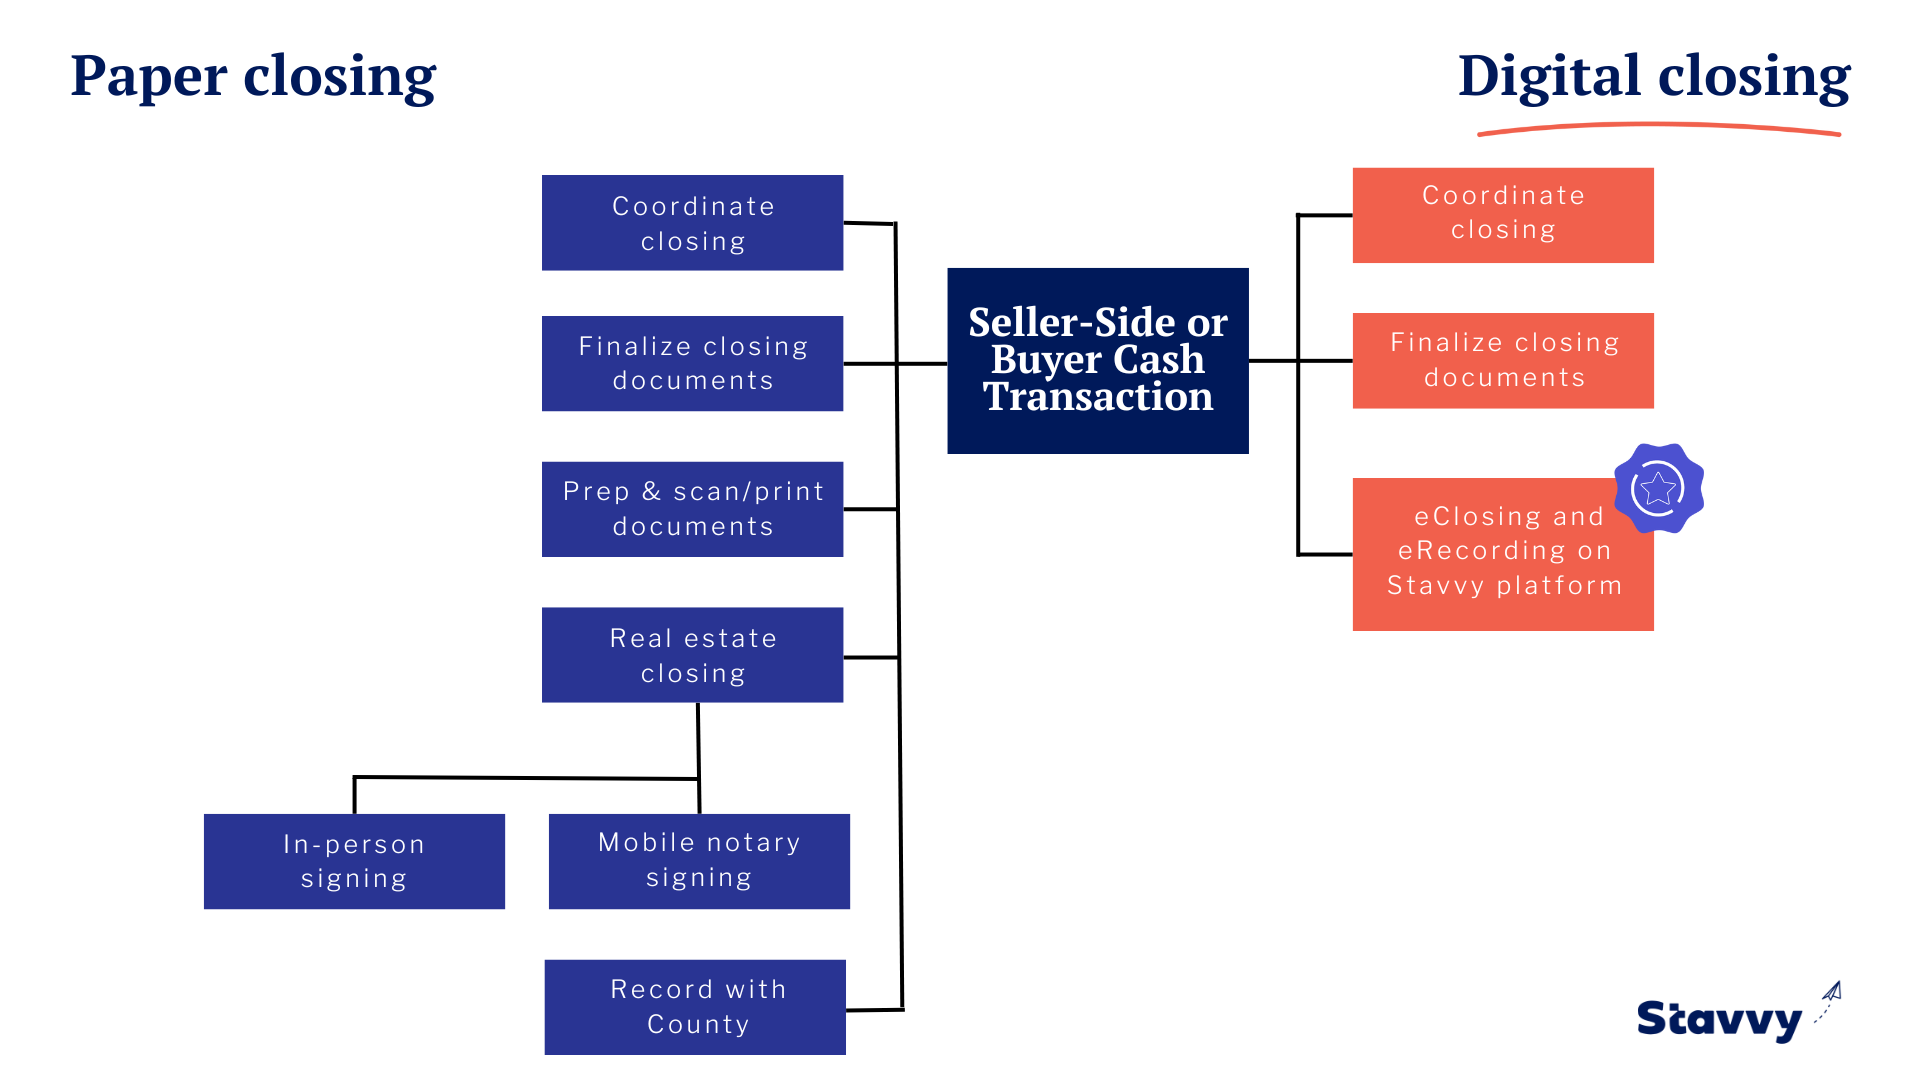 A diagram of paper vs digital closing in a seller-side or buyer cash transaction